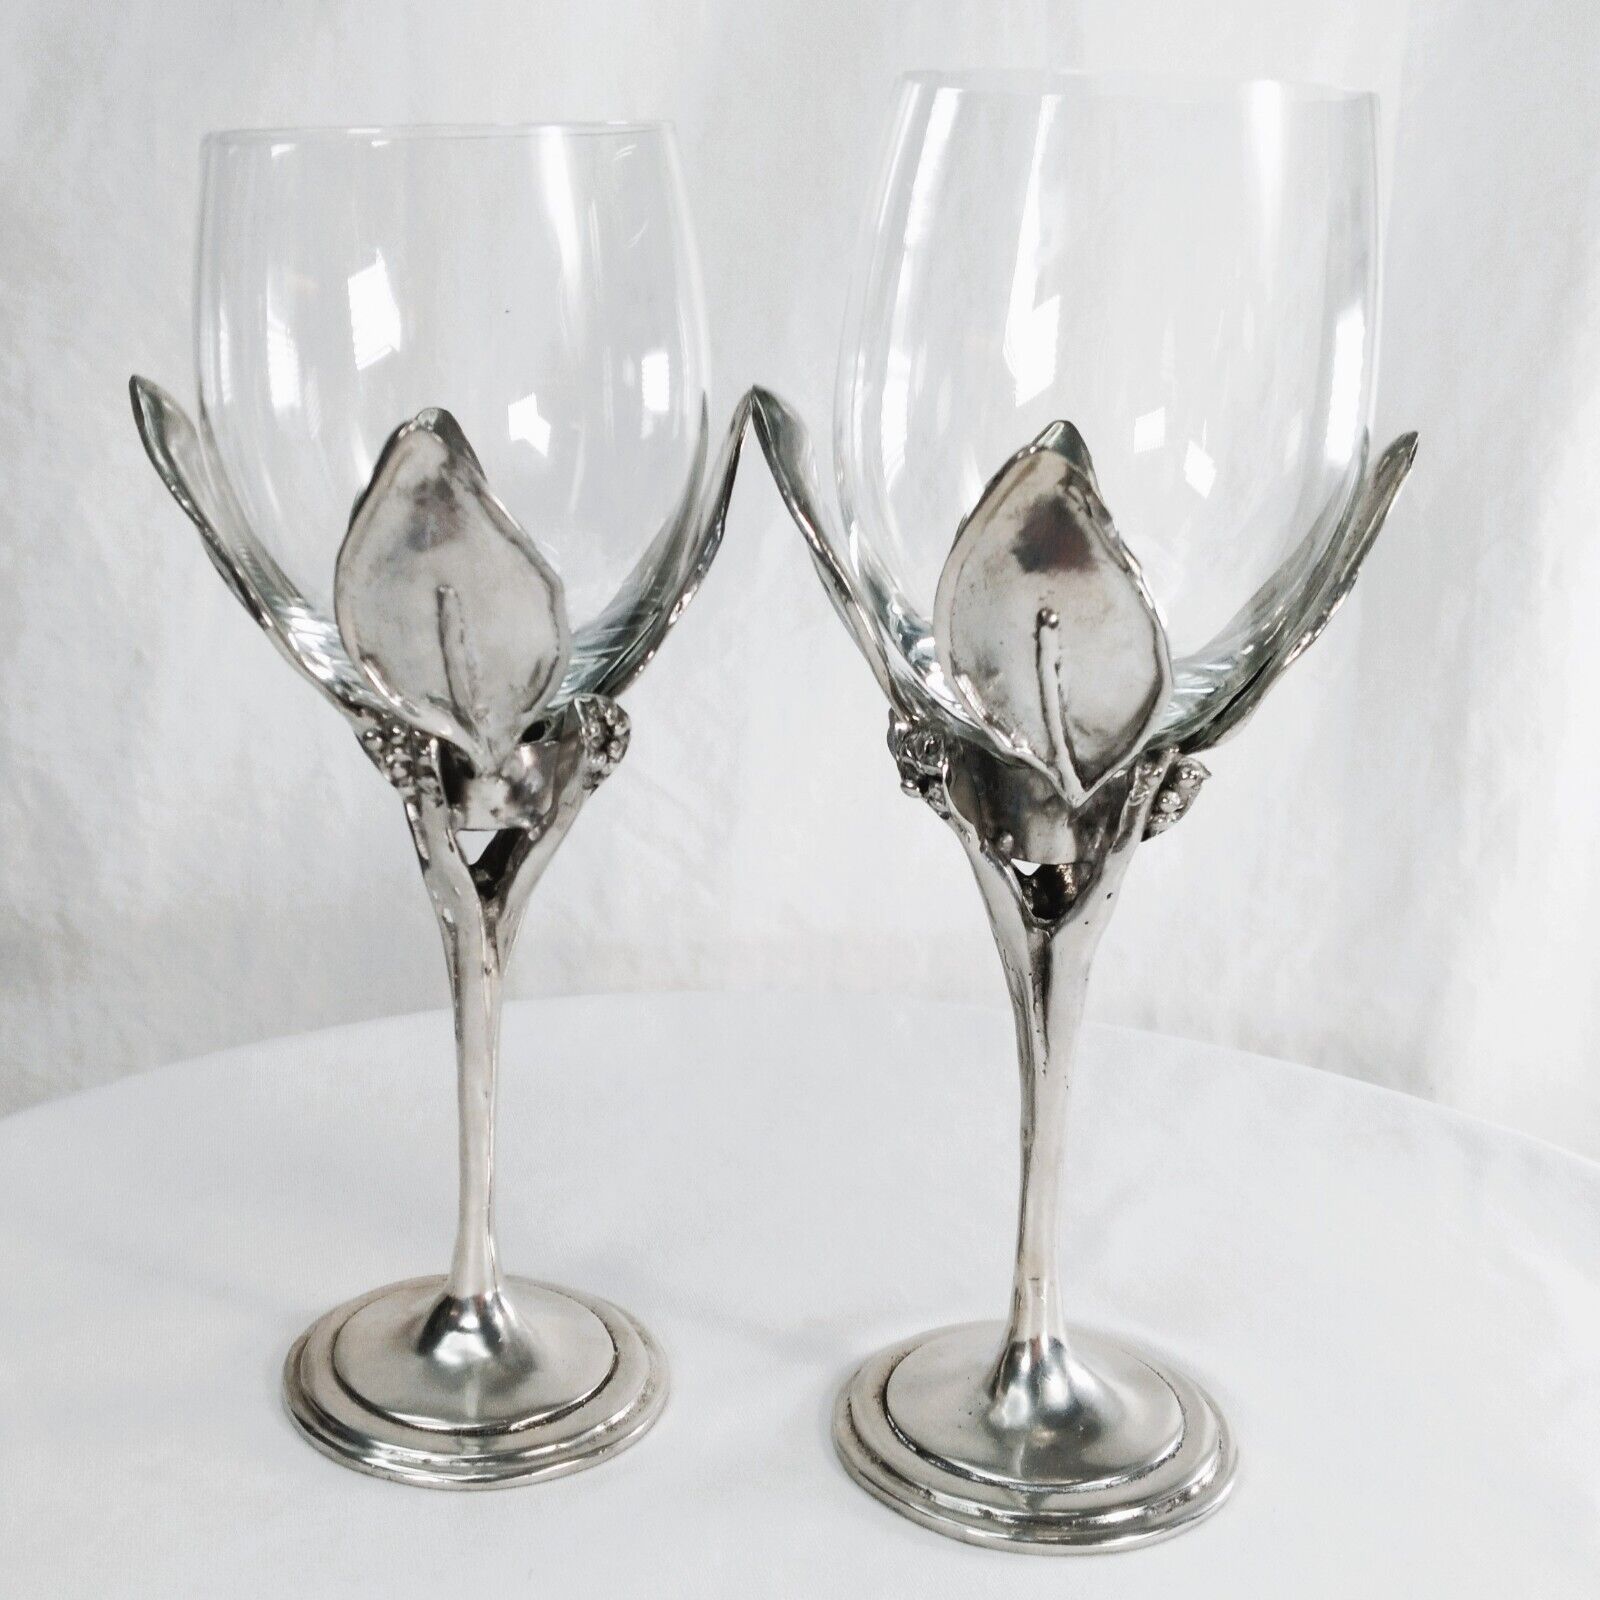 2 Handcrafted Pewter Fruit Vine Stem Leaves with Wine Glass Bowl Inserts 8 Oz